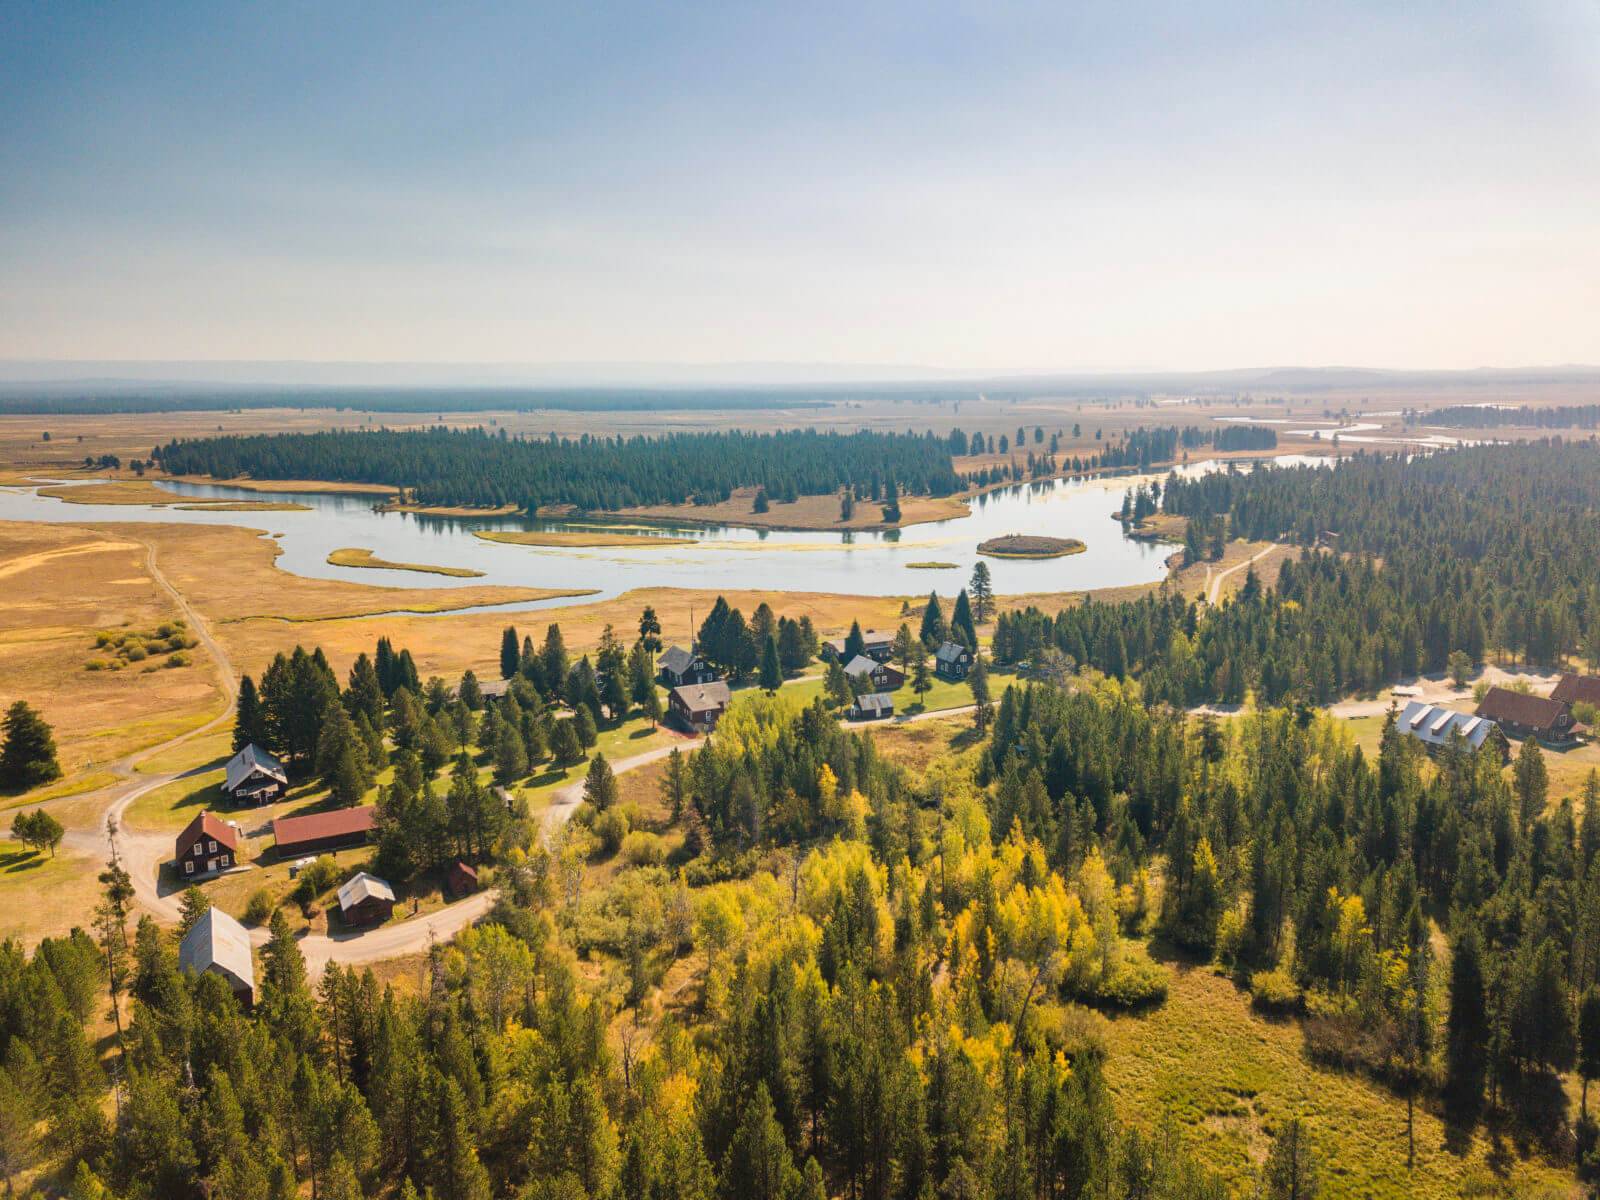 An aerial view of a state park made up of buildings, forest and river during fall.